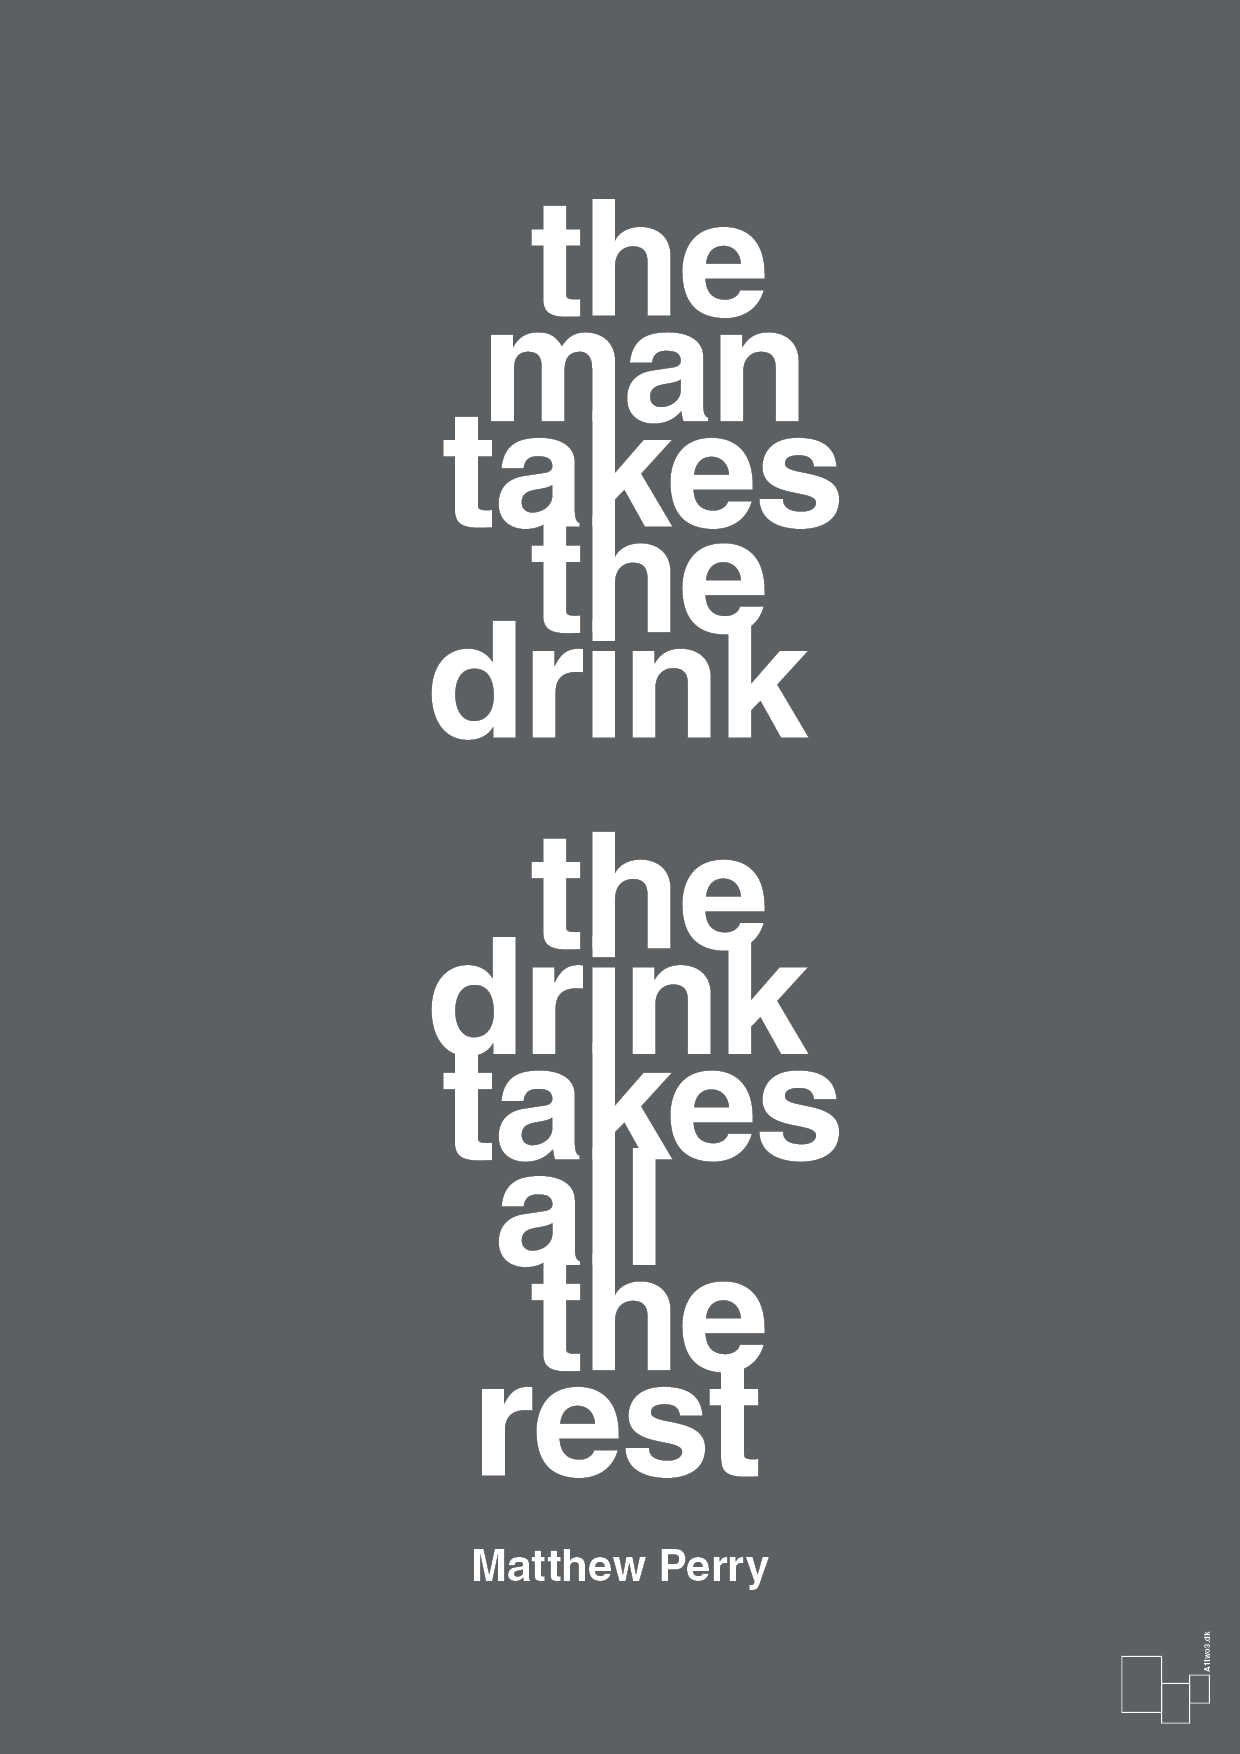 the man takes the drink the drink takes all the rest - Plakat med Citater i Graphic Charcoal